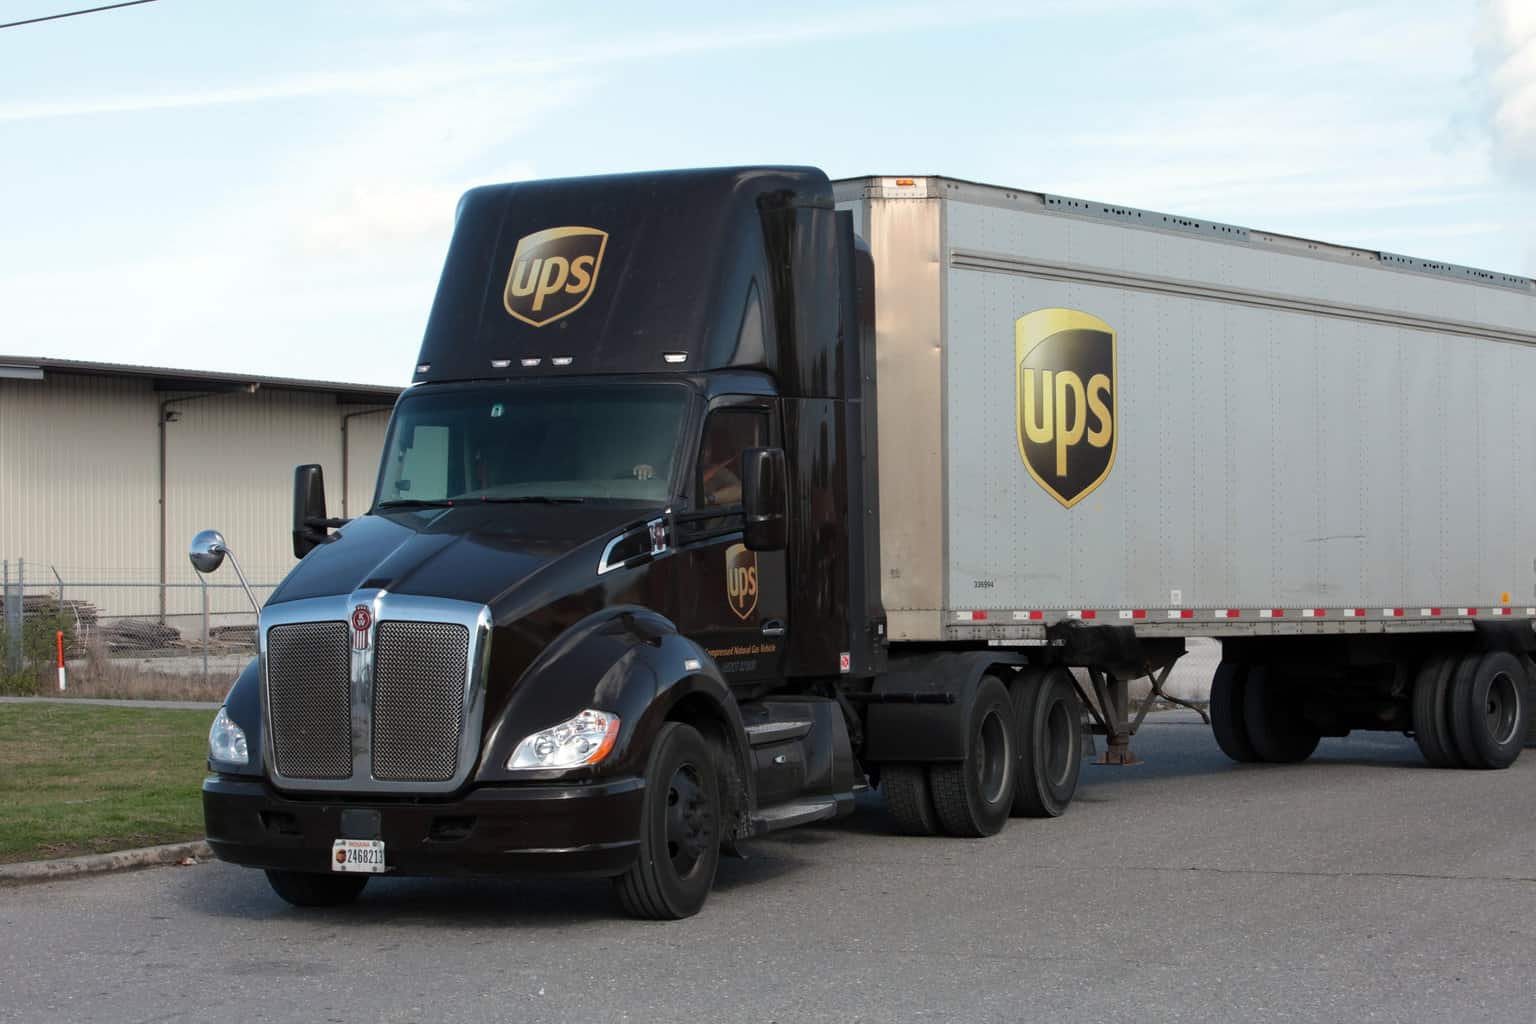 King of the hill: an elite group of UPS drivers would get as much as 96 cts  per mile in a few years - FreightWaves